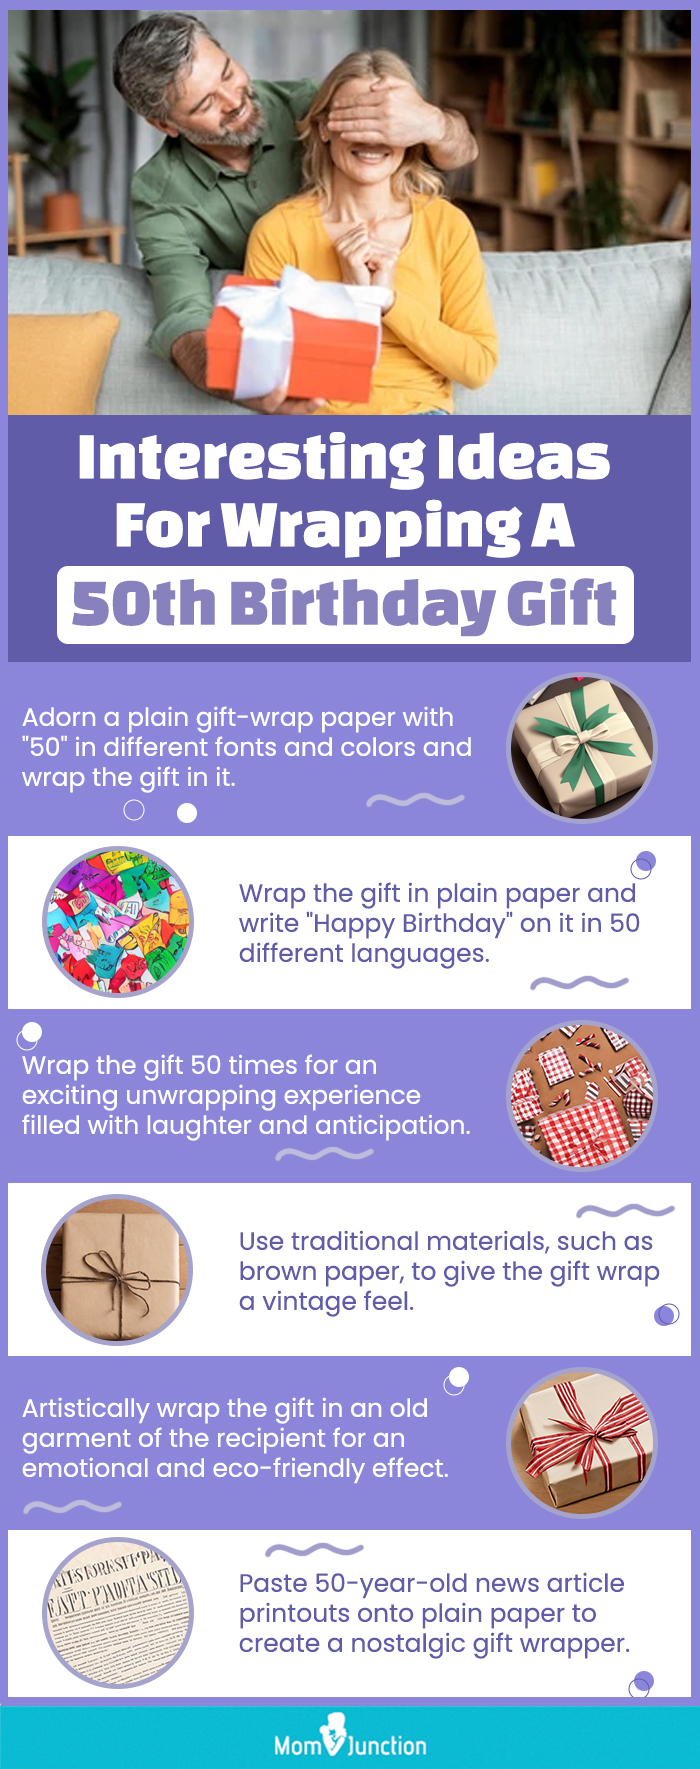 Interesting Ideas For Wrapping A 50th Birthday Gift (infographic)